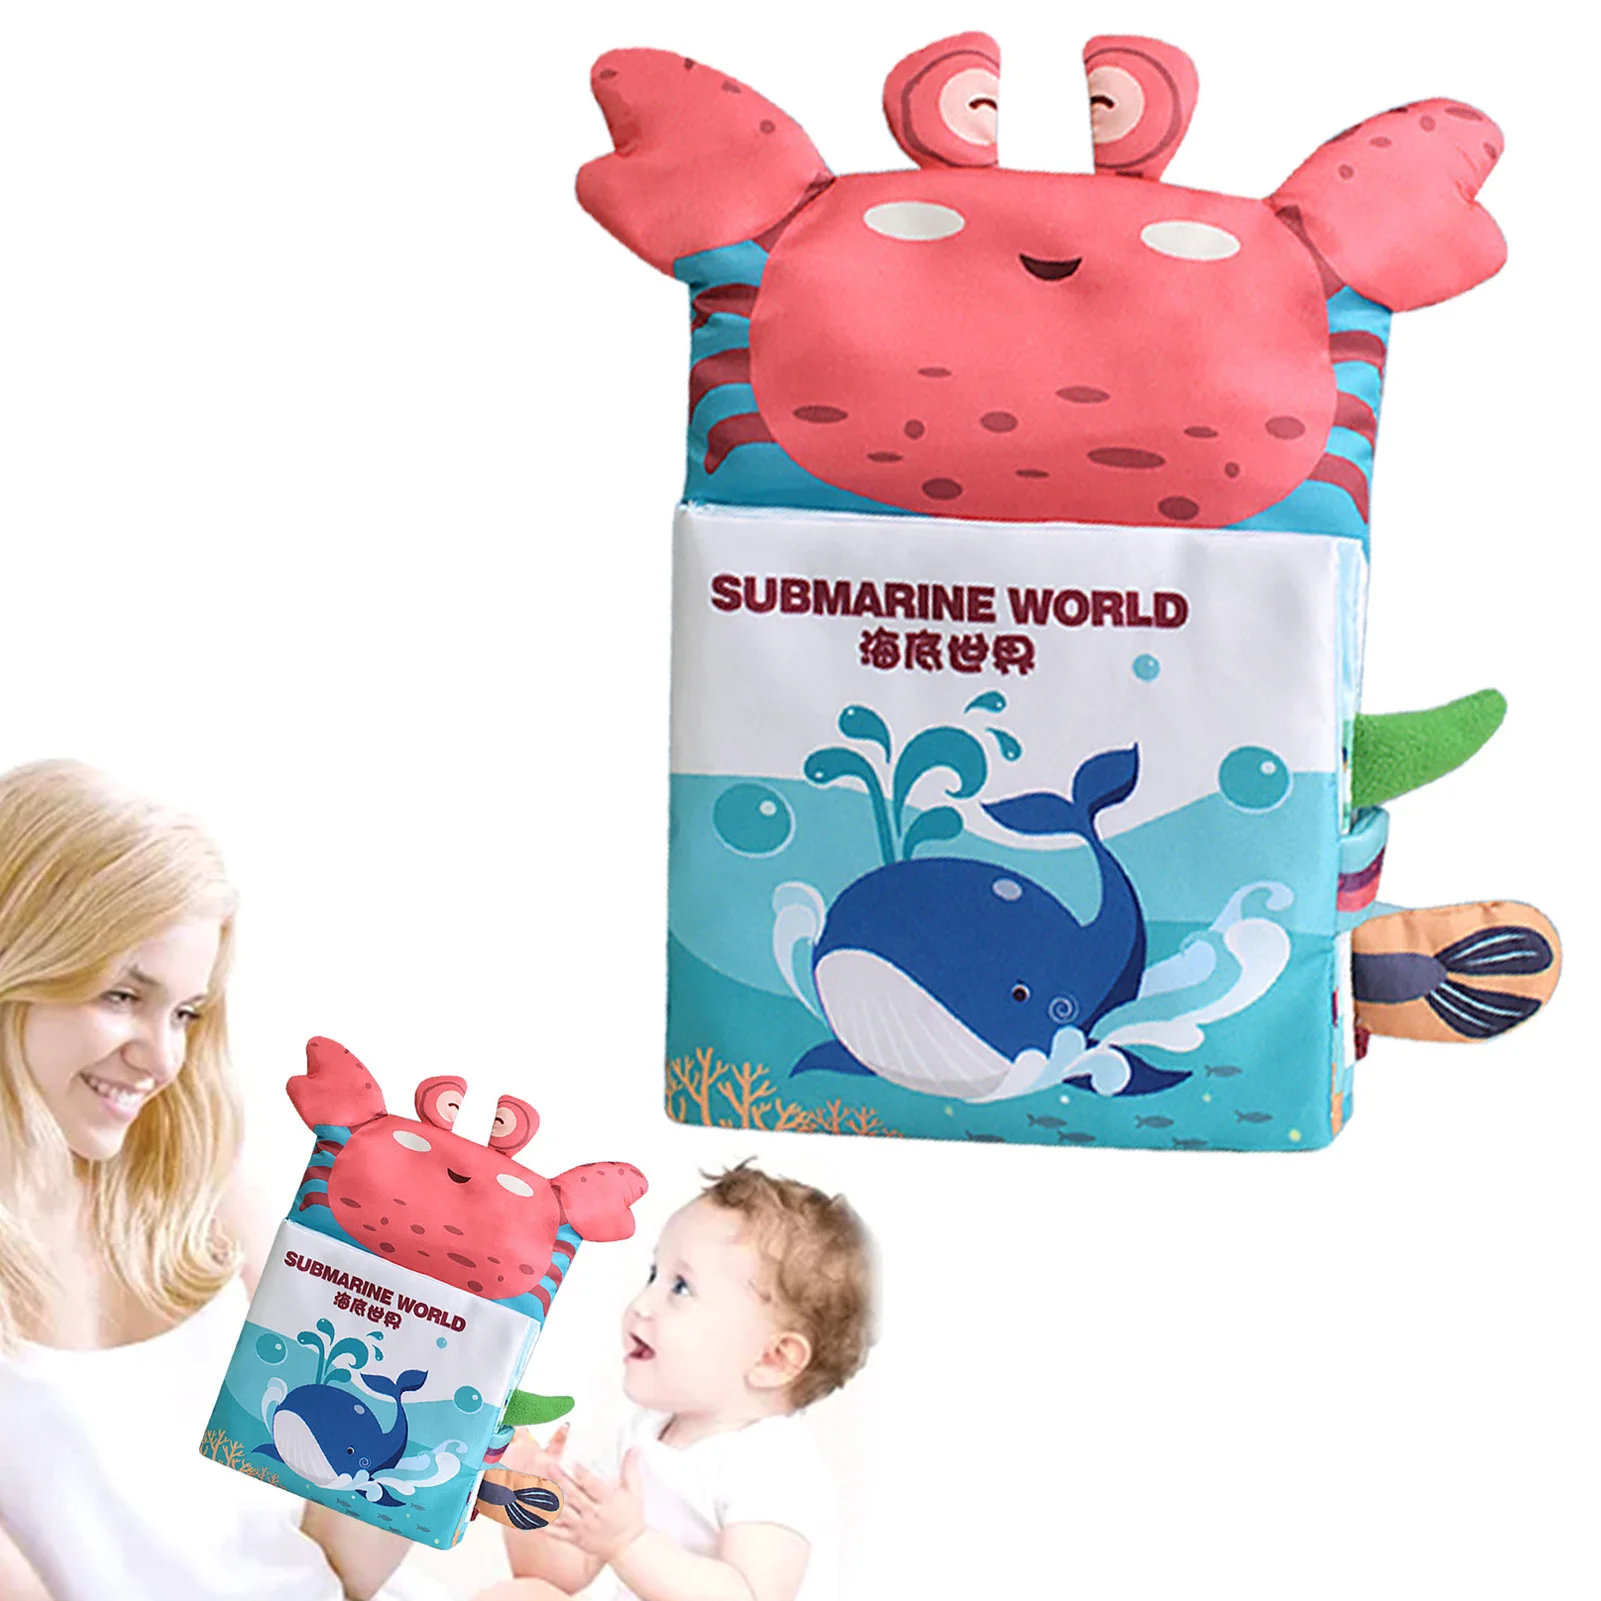 

Submarine World Soft Cloth Book Touch And Feel Crinkle Cloth Books For Babies Animal Puppets Busy Book Soft Activity Early